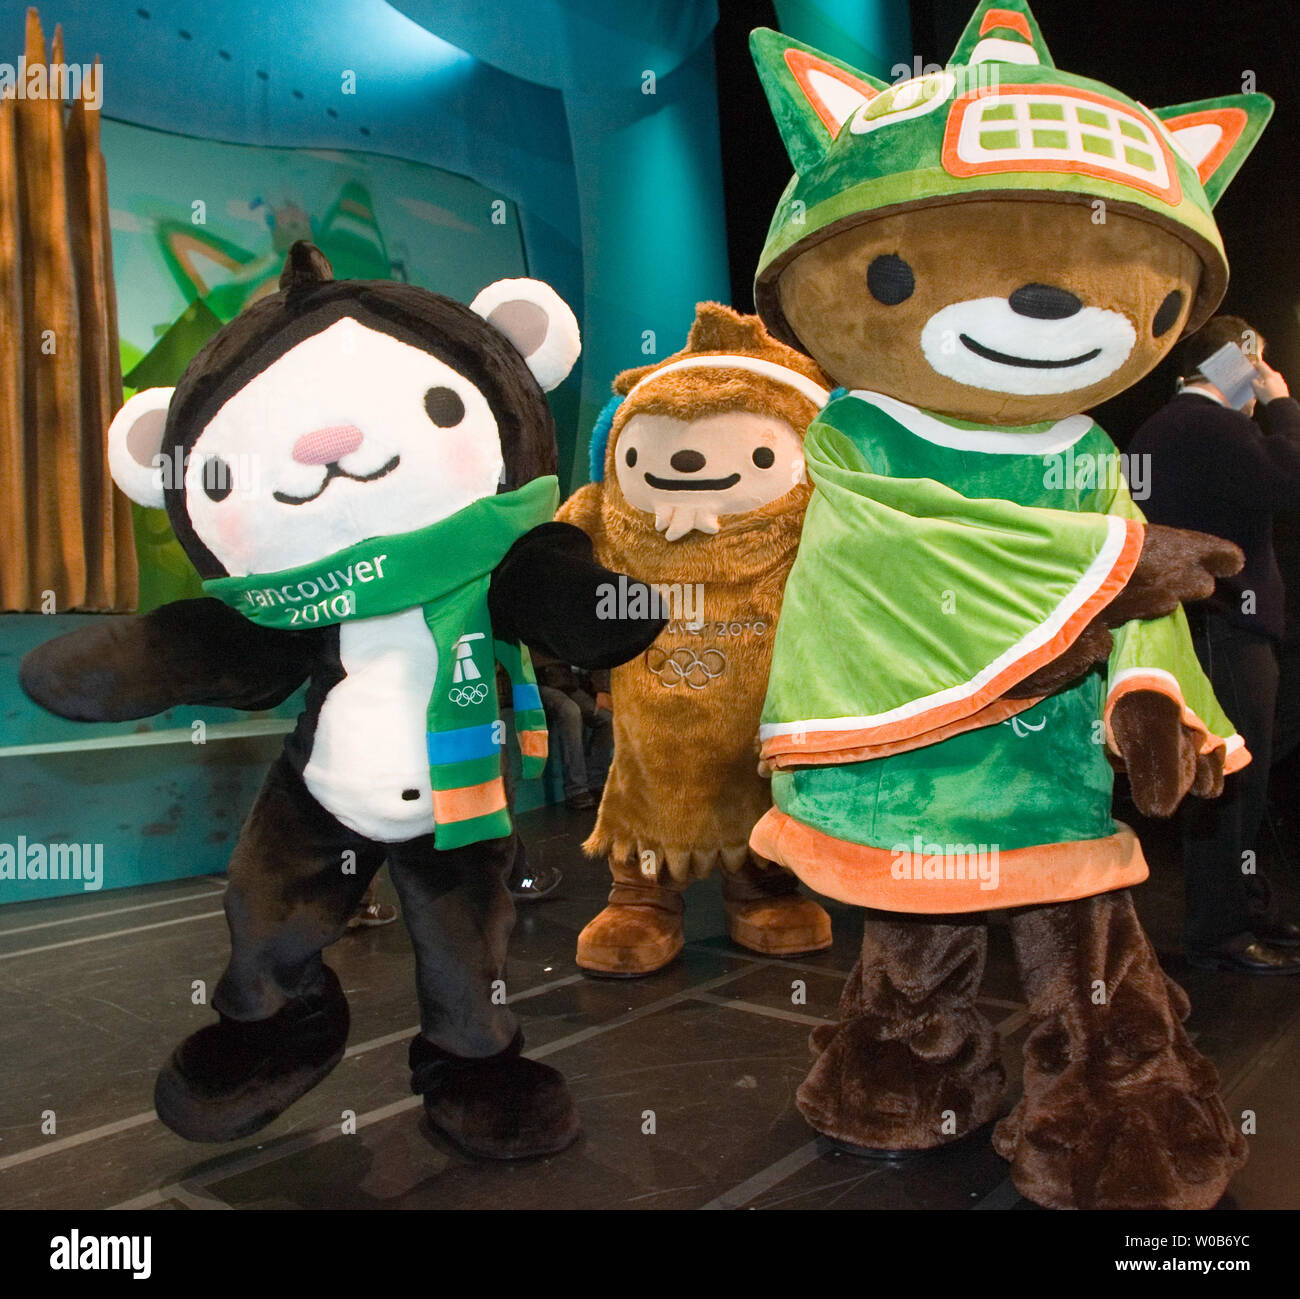 The 2010 Winter Olympic Mascots Miga (L), Quatchi and Sumi (R) are unveiled in Surrey near Vancouver, British Columbia, November 27, 2007. Miga is a sea bear which according to First Nations legend is an orca whale which can turn into the rare white Kermode bear only found in British Columbia. Quatchi is a sasquatch described in many West Coast First Nations stories but rarely seen. Sumi is an animal gaurdian spirit who wears the hat of an orca, has the strong leags of the black bear and flies with the wings of the great thunderbird.  (UPI Photo/Heinz Ruckemann) Stock Photo